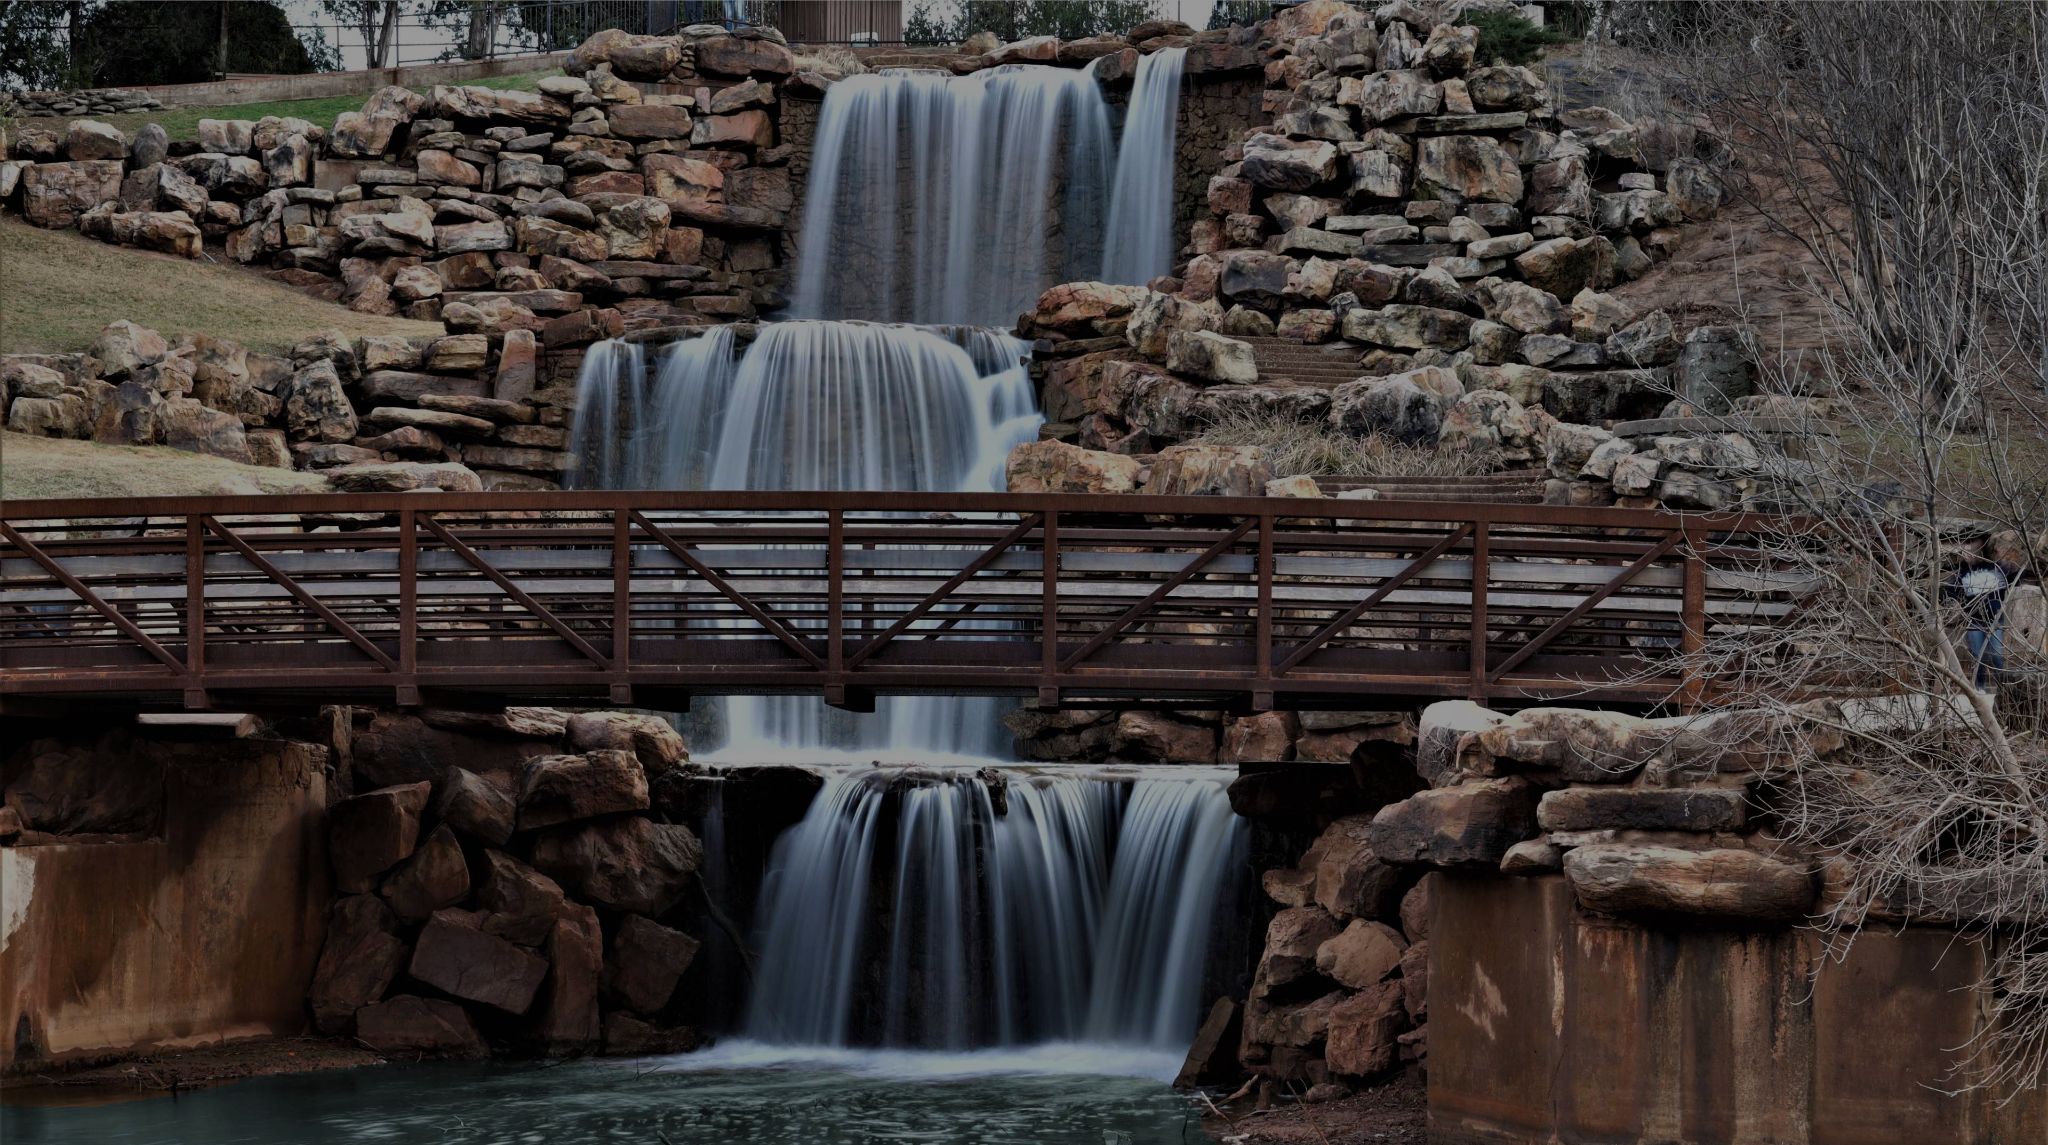 Photo of a three-tier waterfall over rocks with a pedestrian bridge in front.